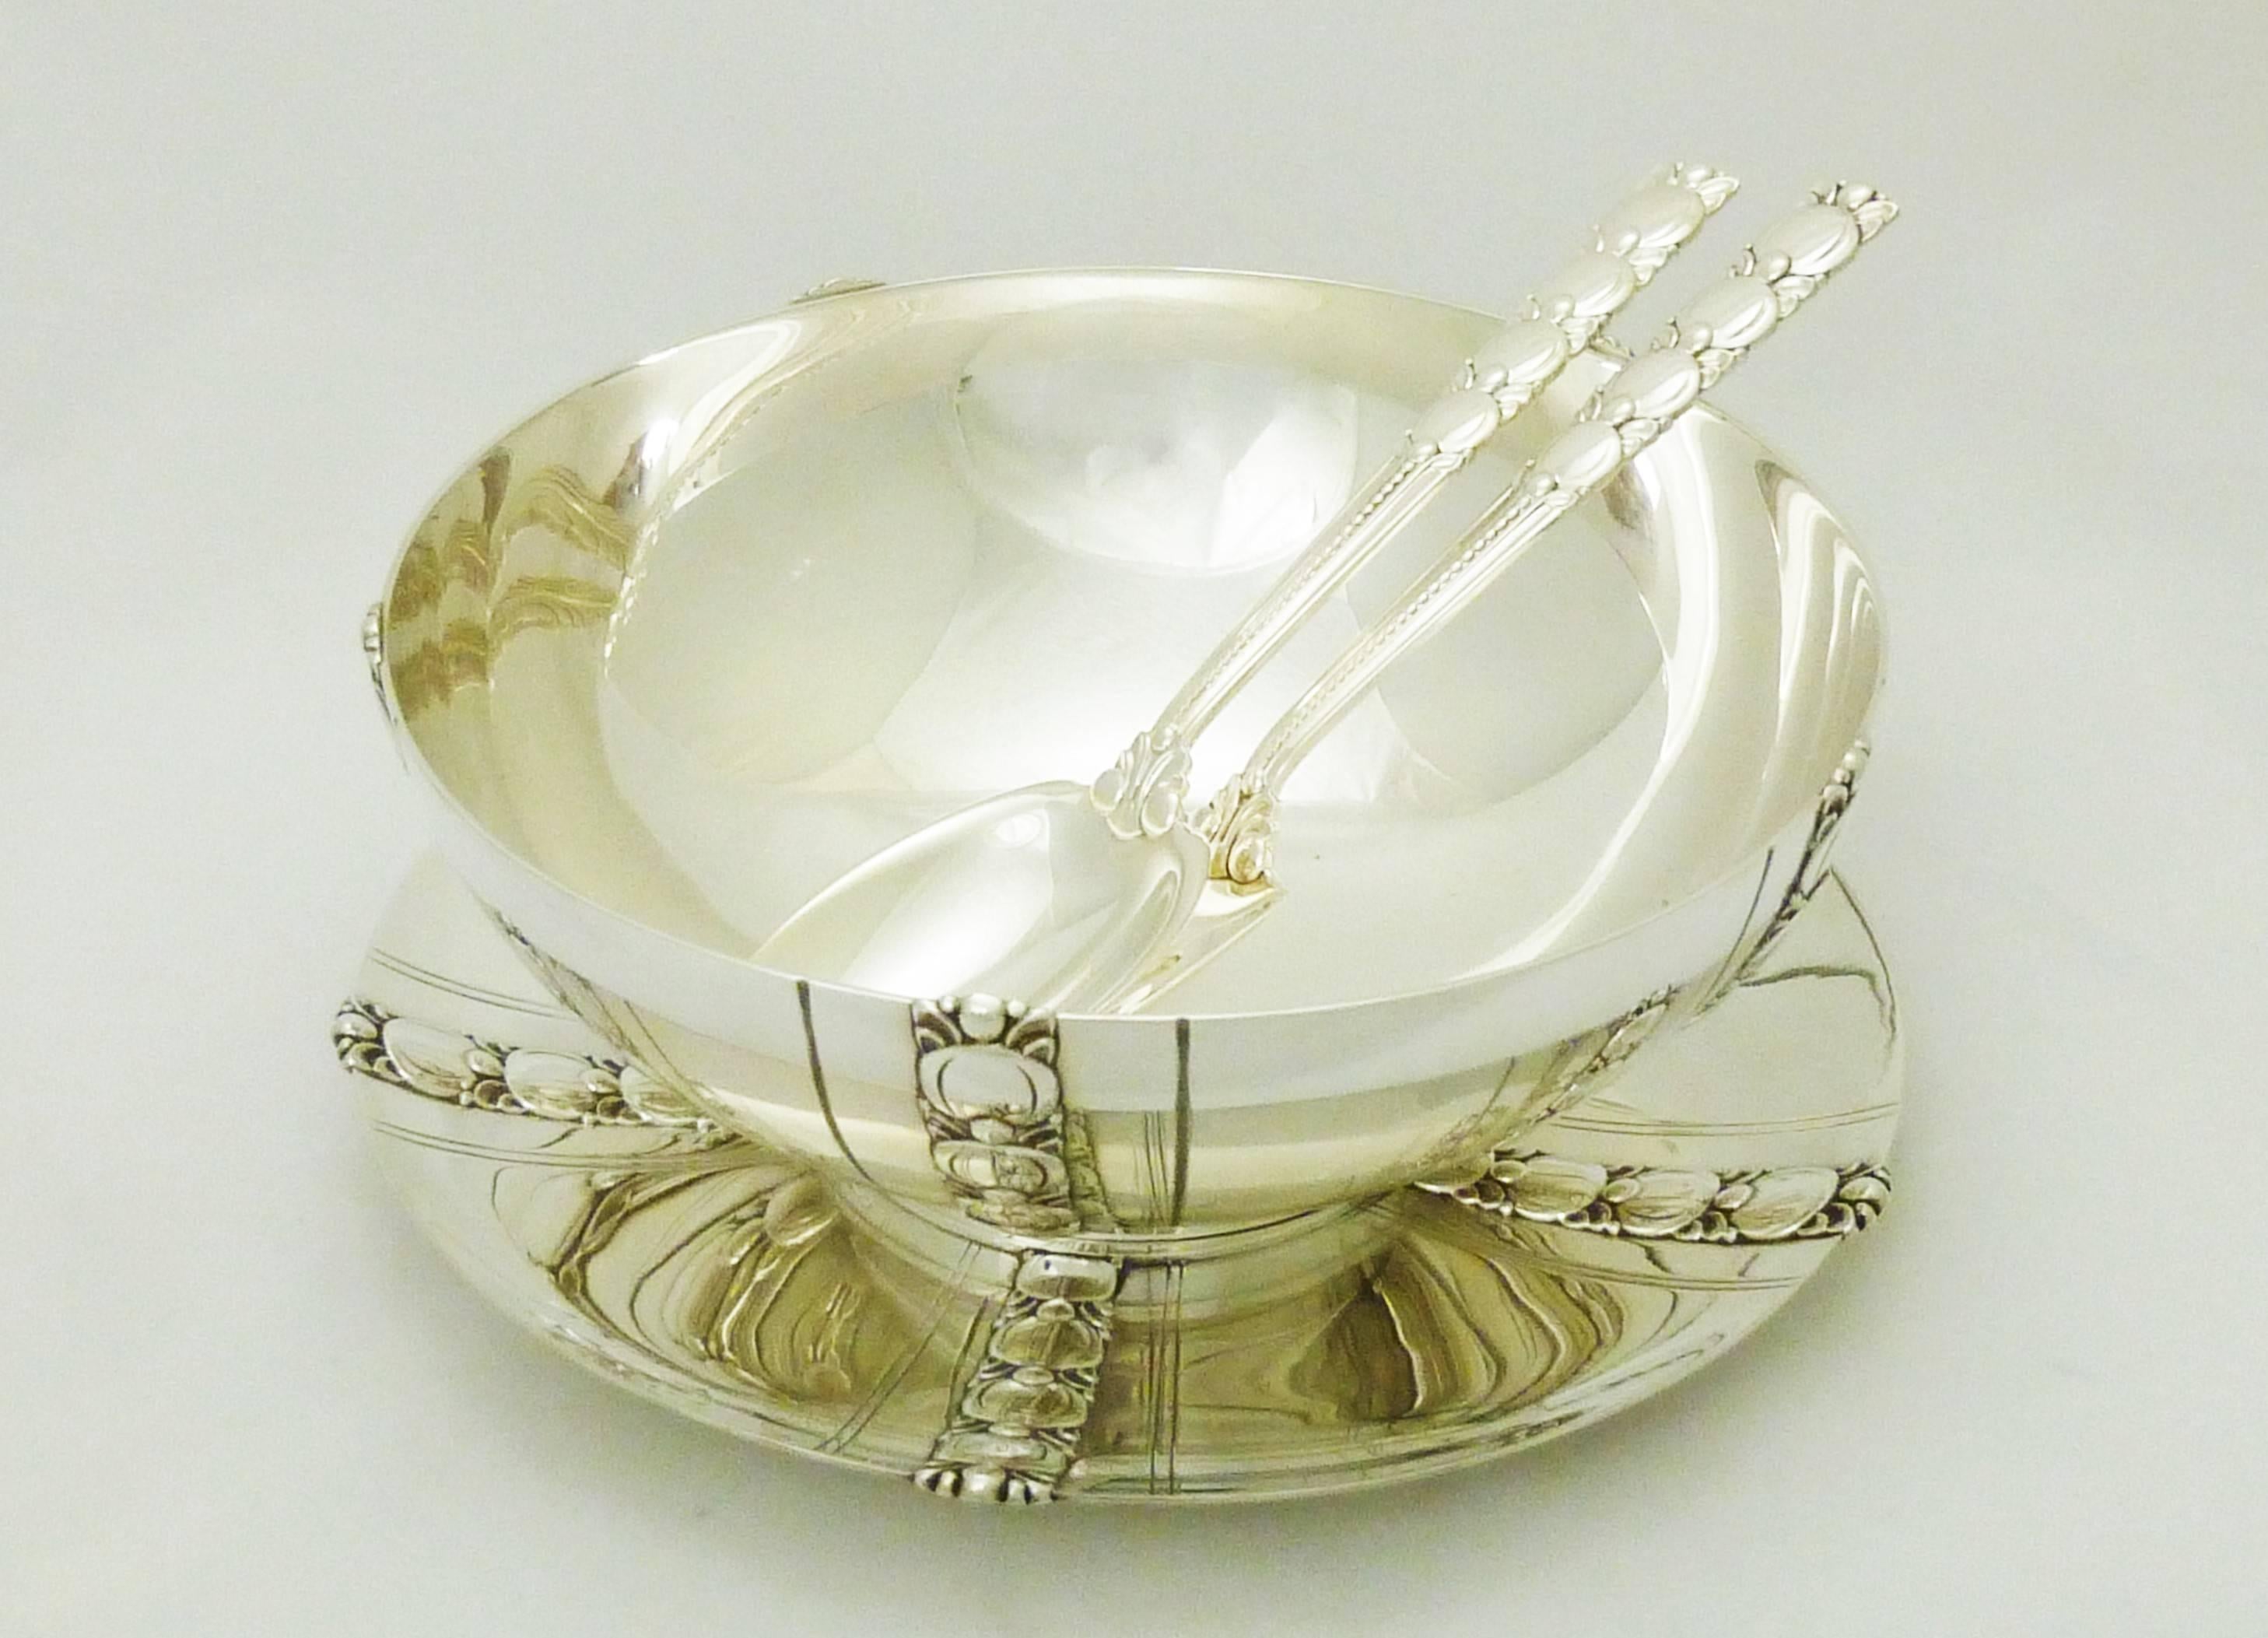 Tiffany & Co. Sterling Silver Bowl, Underplate and Salad Serving Set For Sale 2